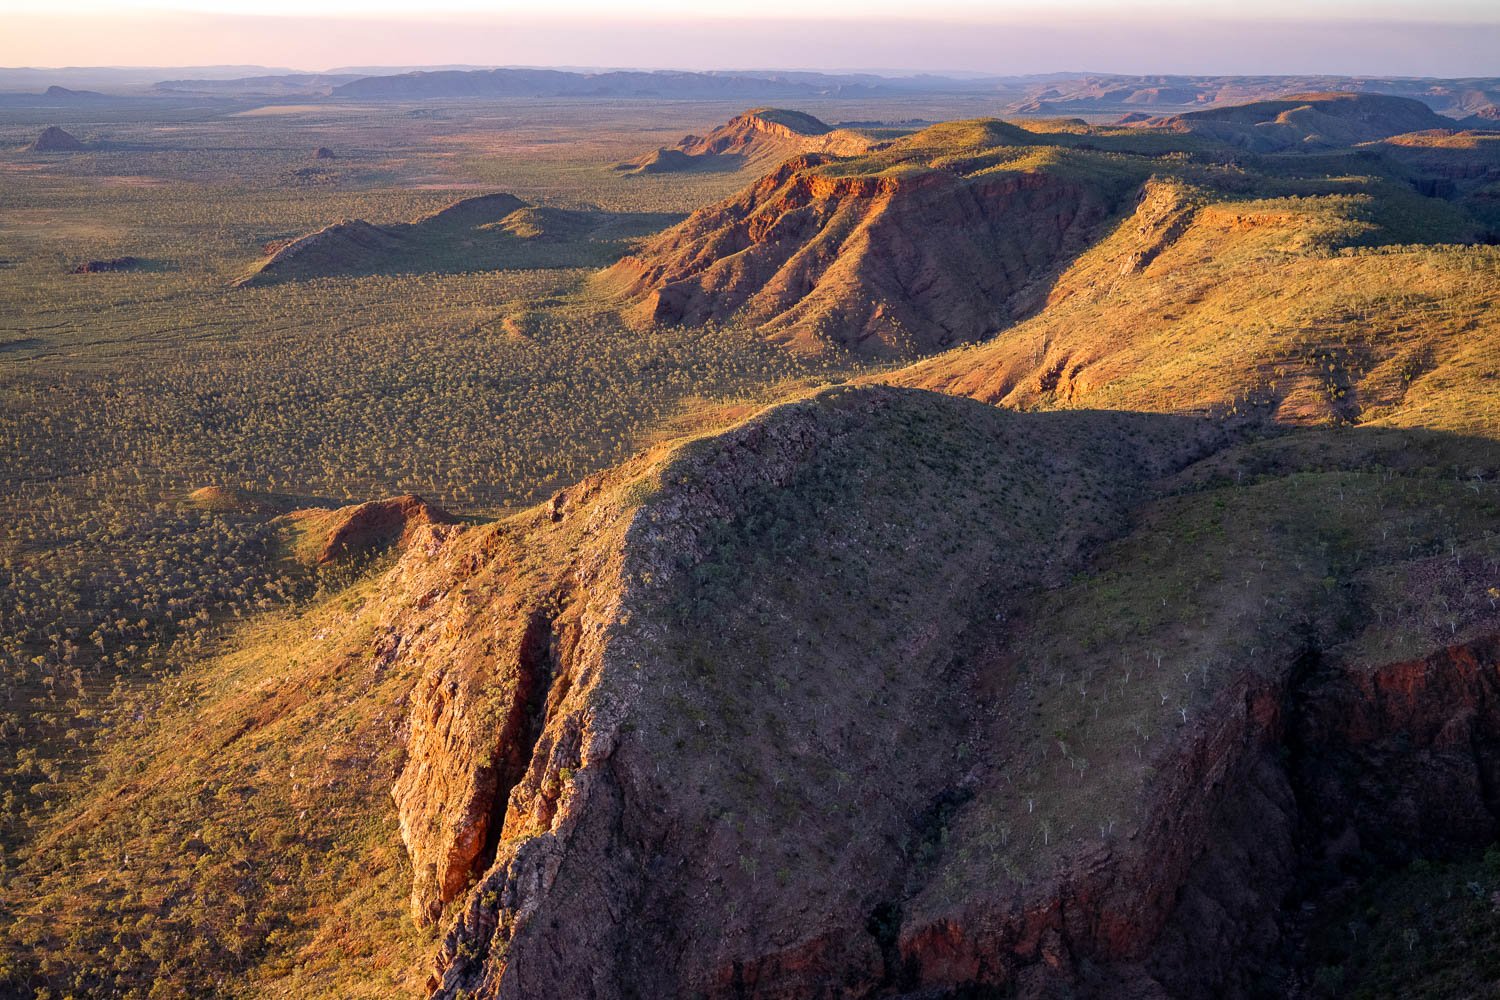 A long wall of giant grassy mountains, and a grassy field area below them, sunlight hitting on the entire scene, CARR BOYD RANGES, THE KIMBERLEY